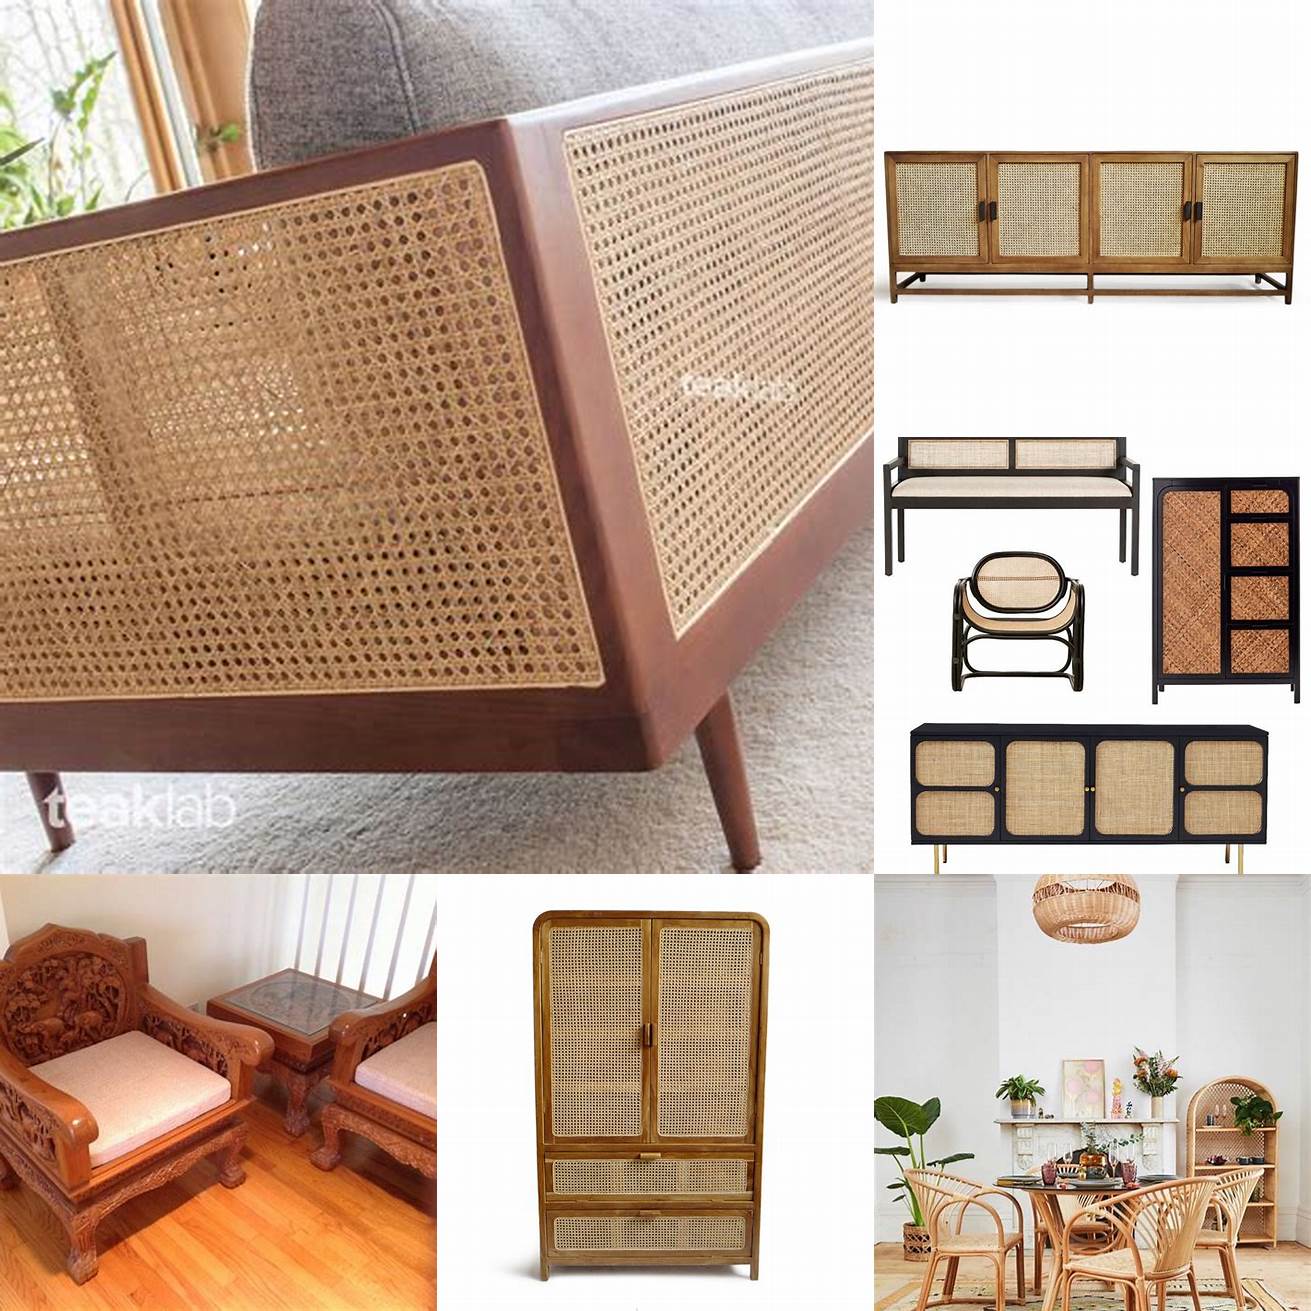 A variety of furniture styles from Teak and Cane